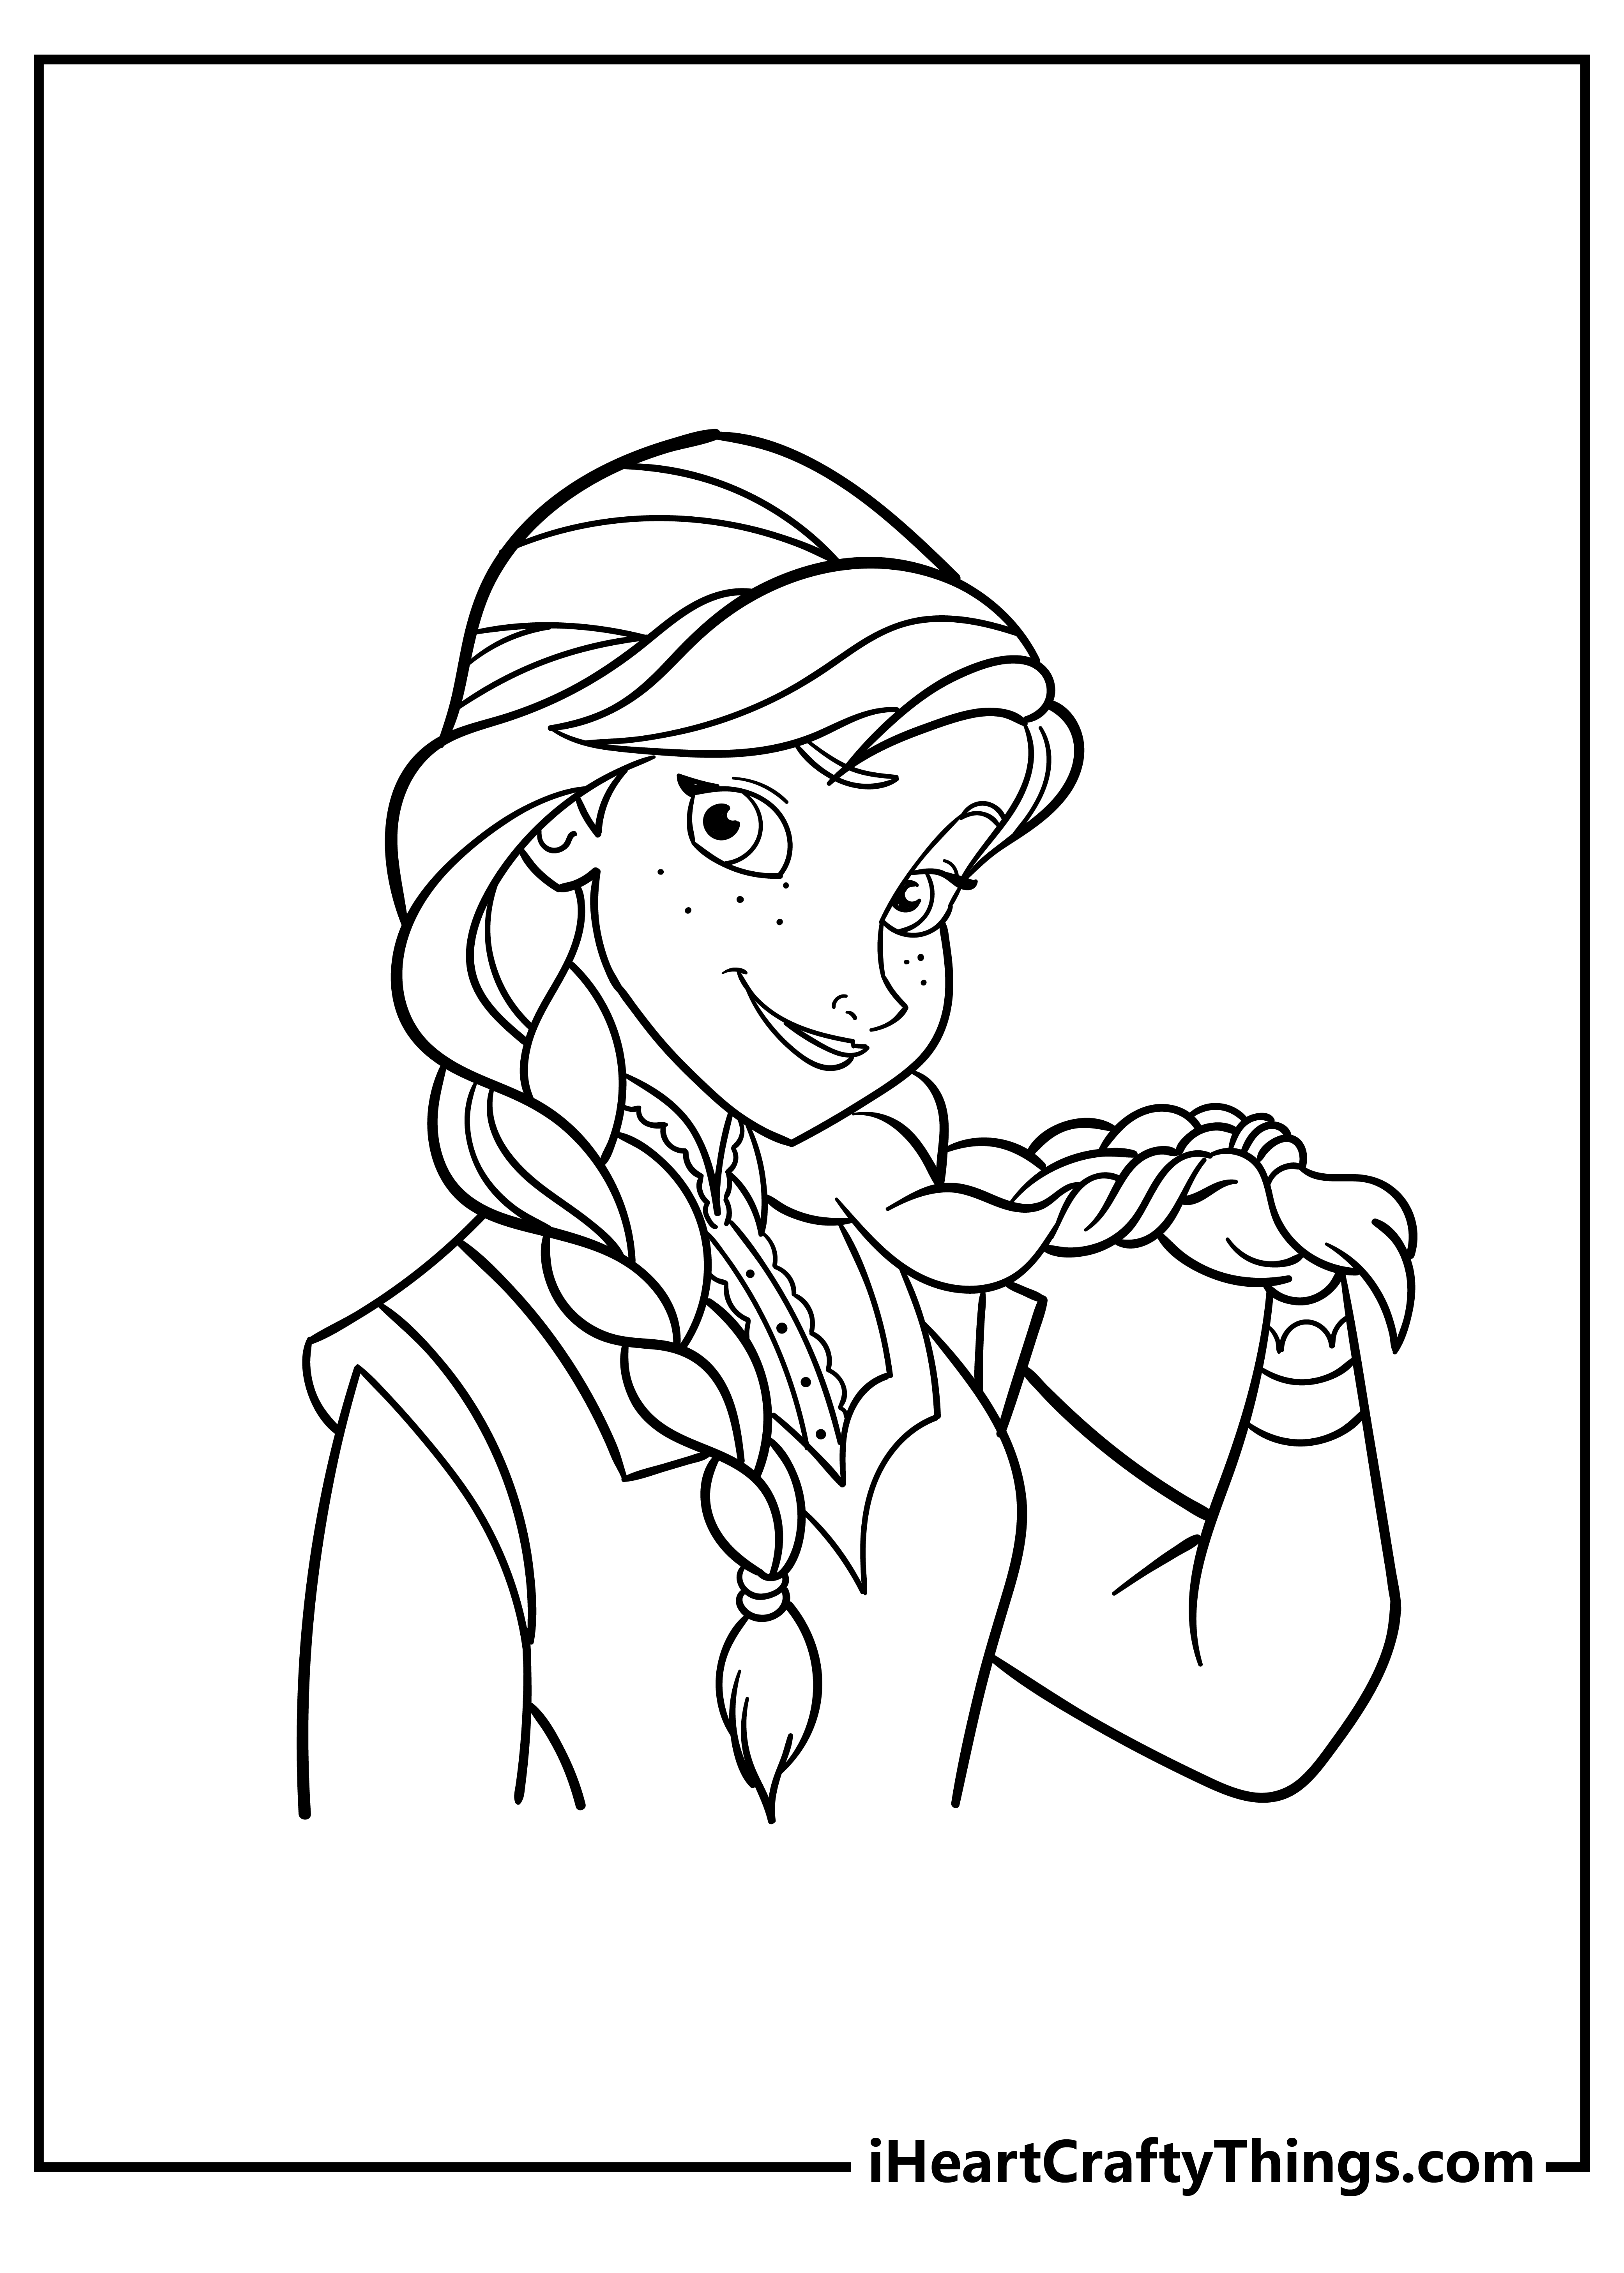 Elsa and Anna Coloring Sheet for children free download